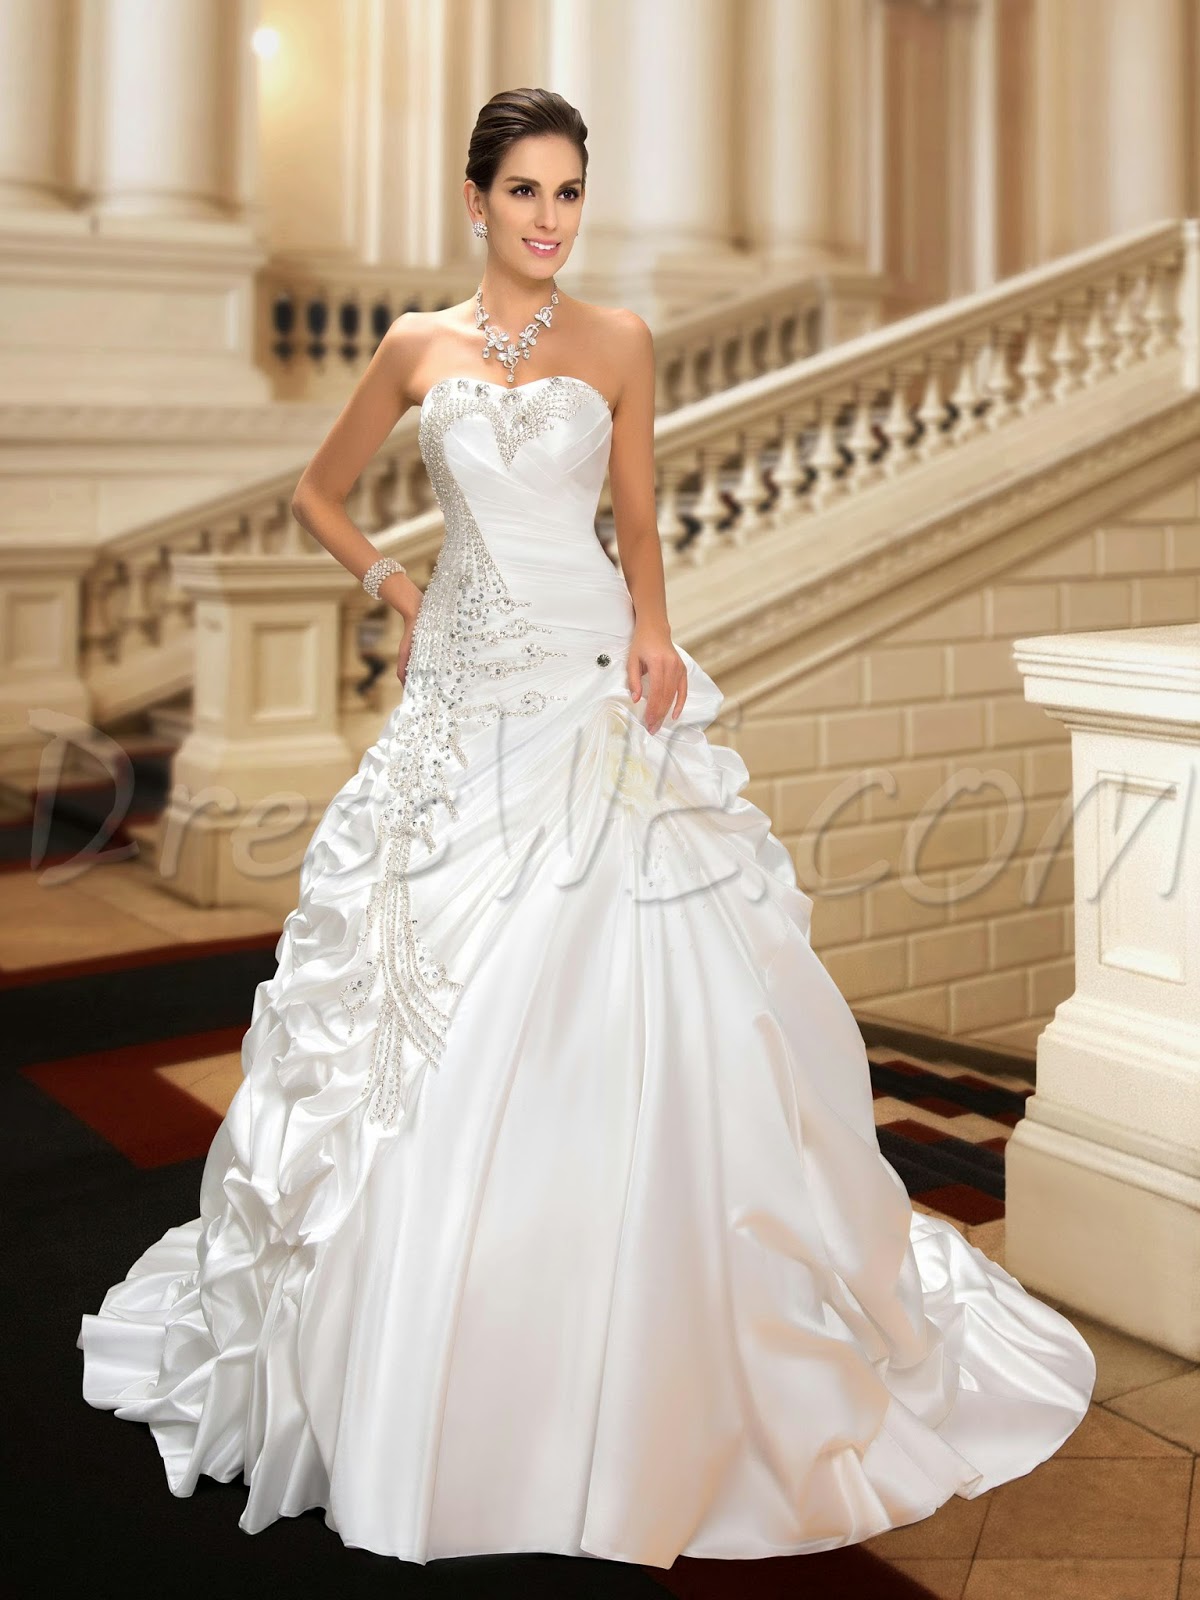 Wedding Dresses and Shoe Inspirations You Will Love - Fine Art and You